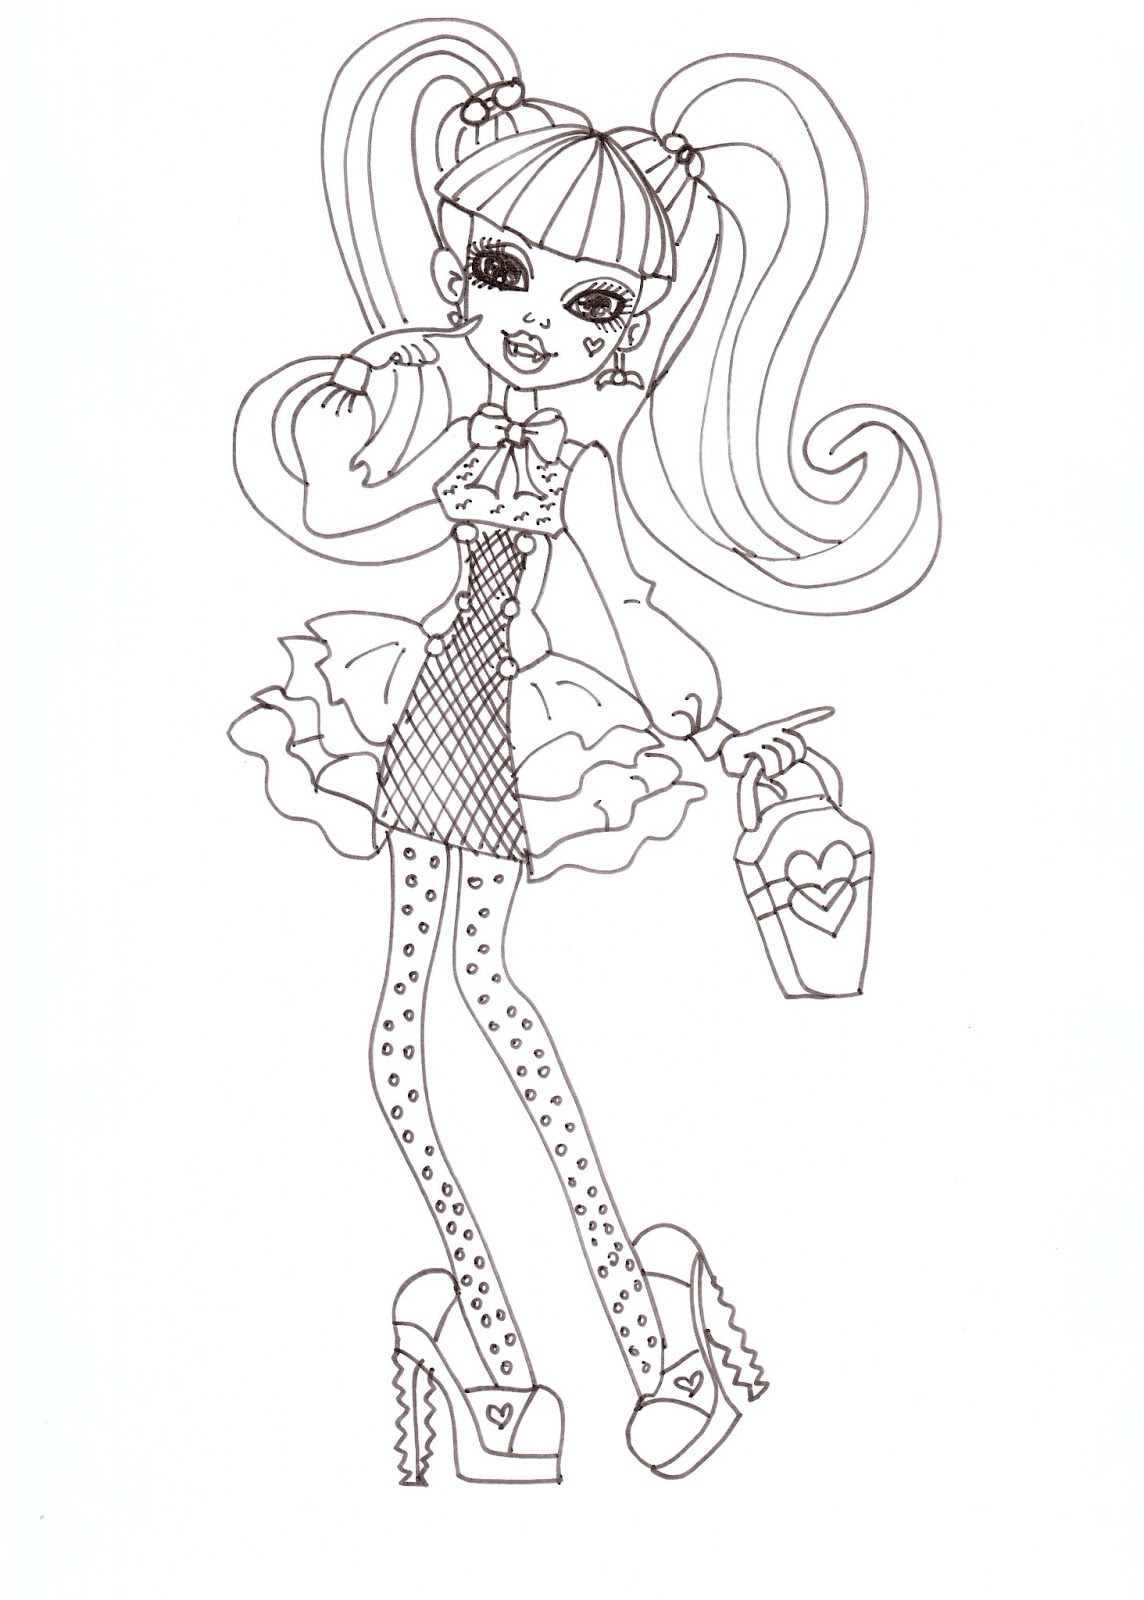 Free Printable Monster High Coloring Pages: Draculaura Coloring Sheet